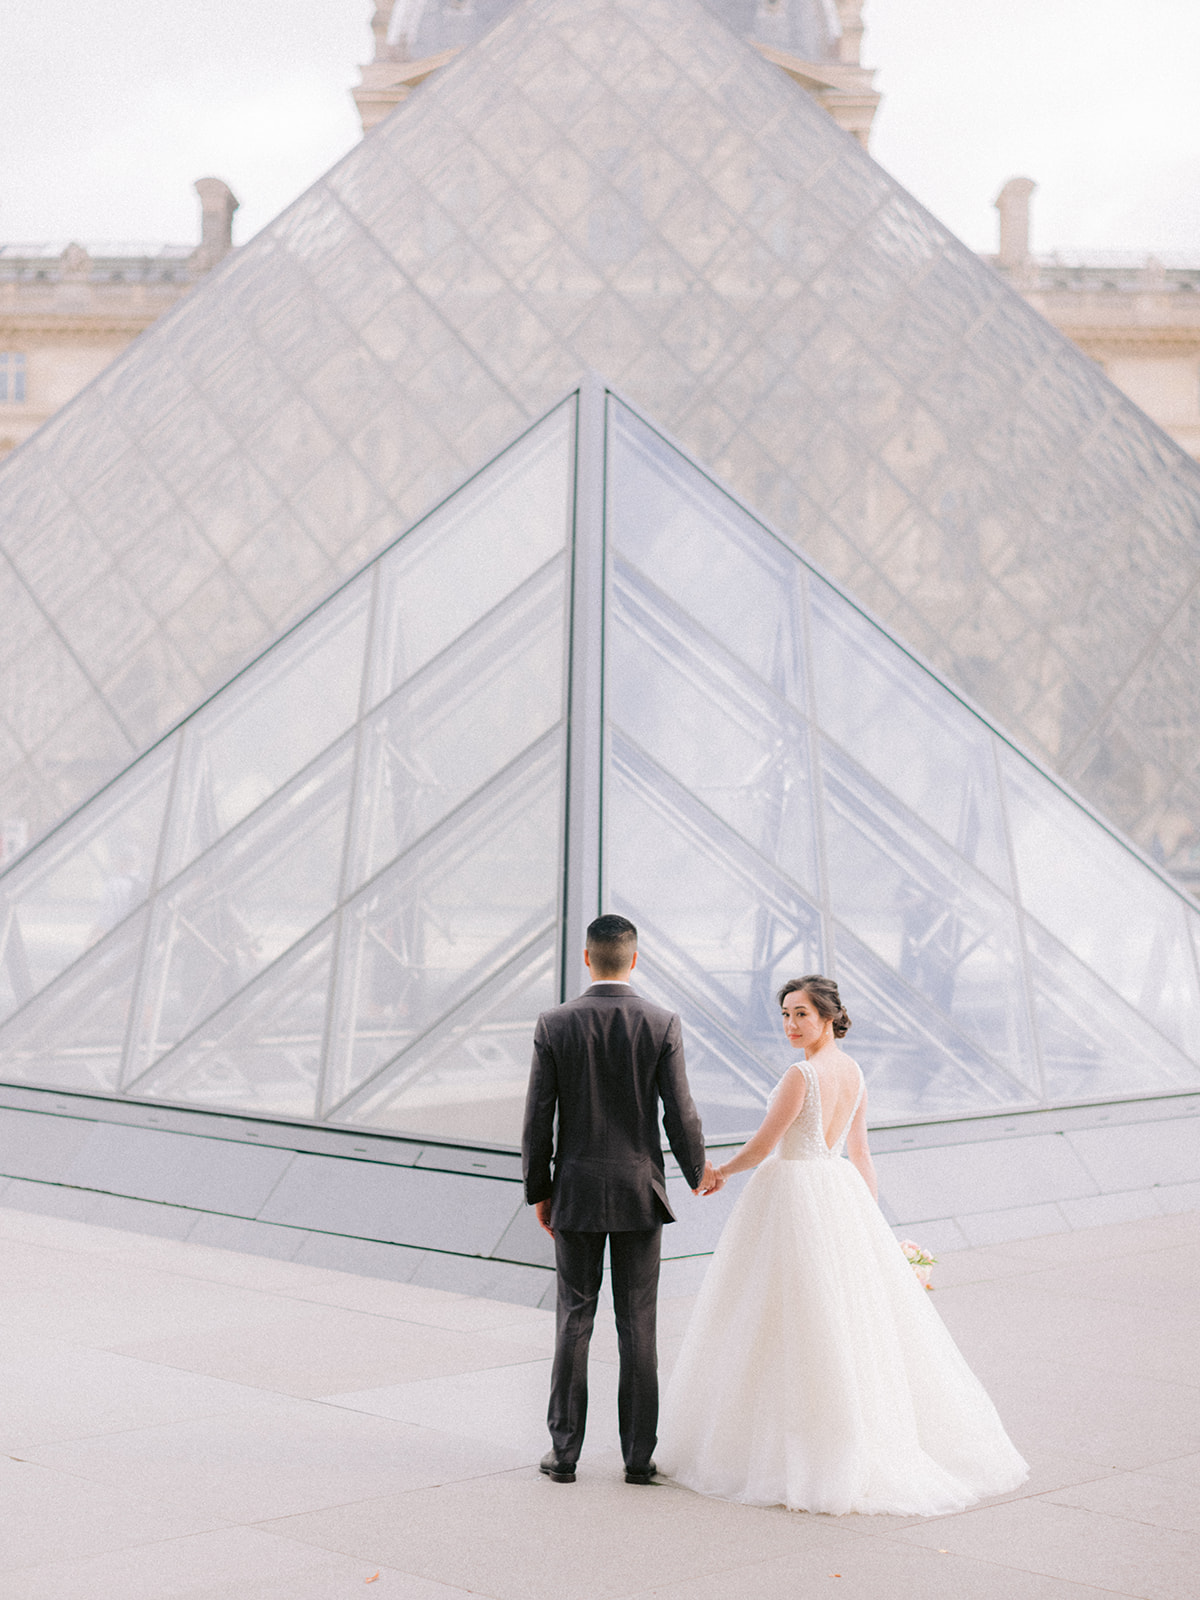 They are walking and in front of them is the Louvre Pyramid